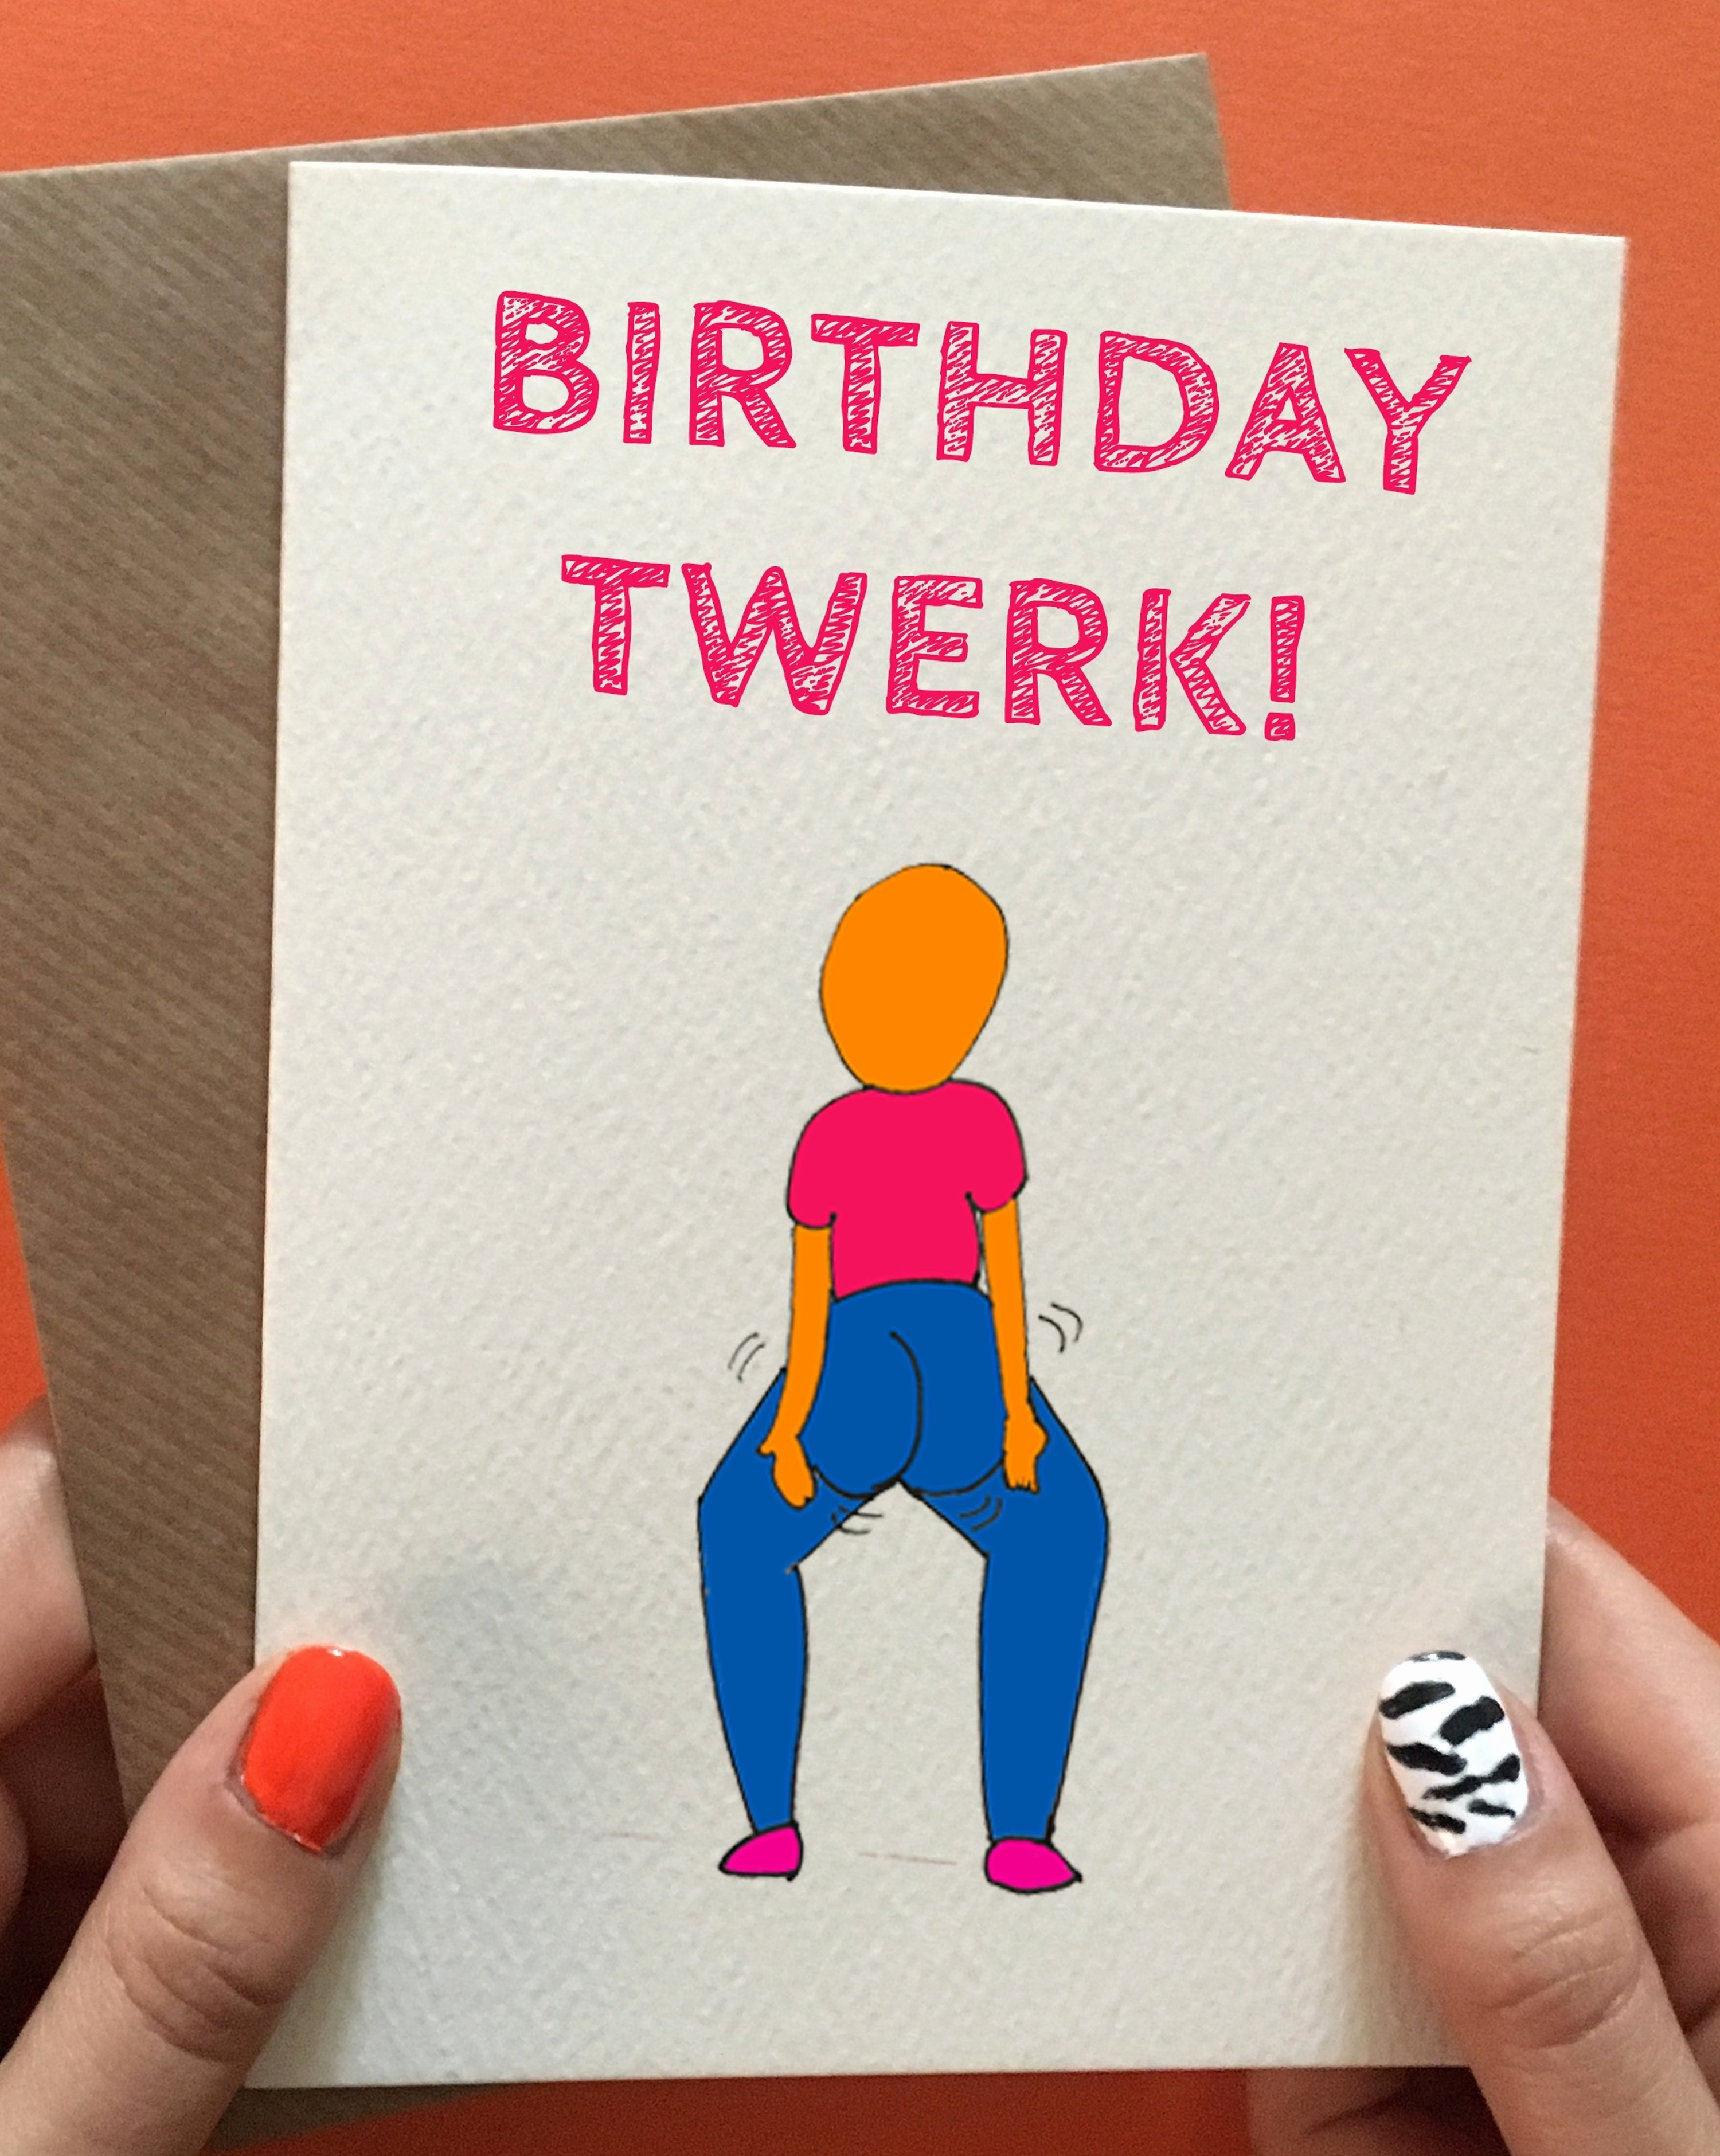 Fun Birthday Card Ideas 10 Most Recommended Birthday Card Ideas For Friends 2019